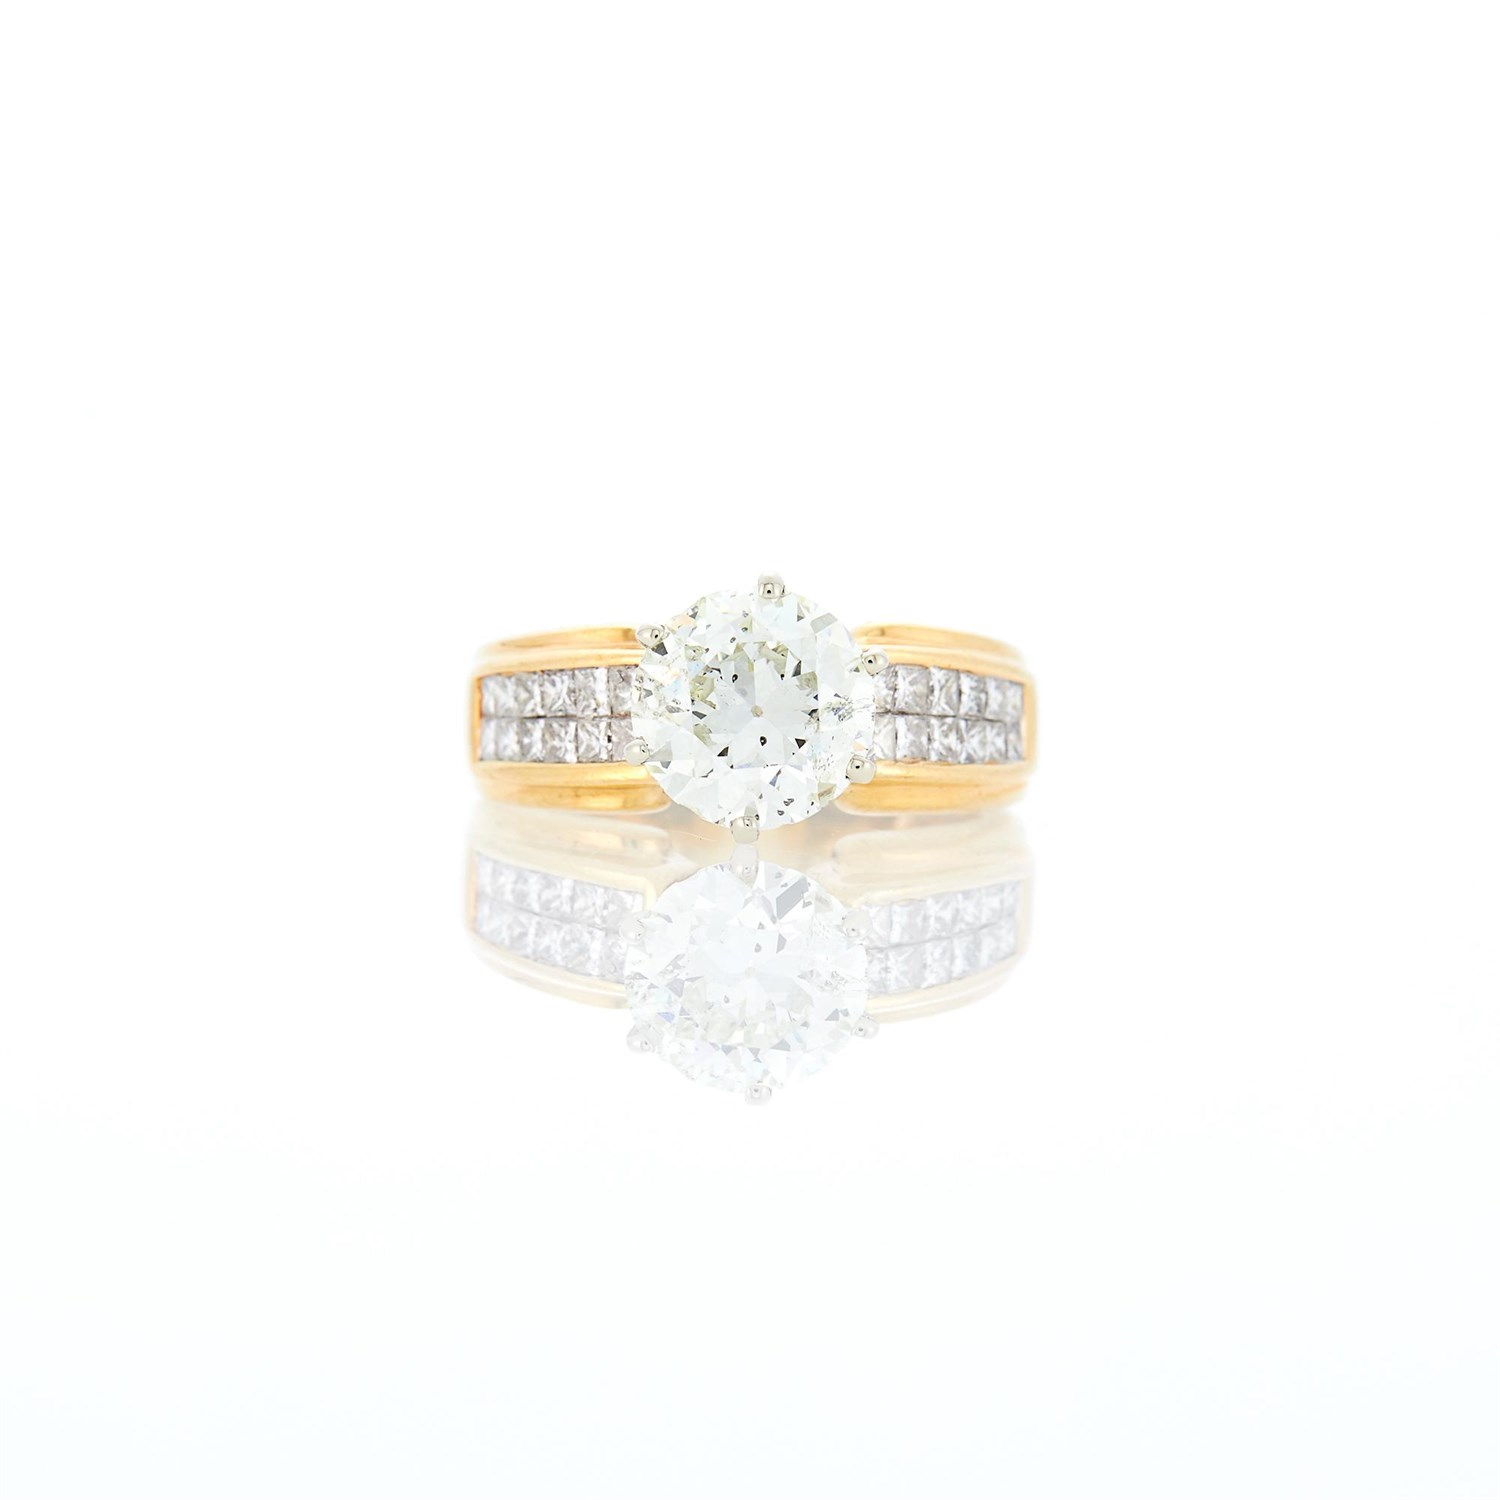 Lot 2058 - Gold and Diamond Ring